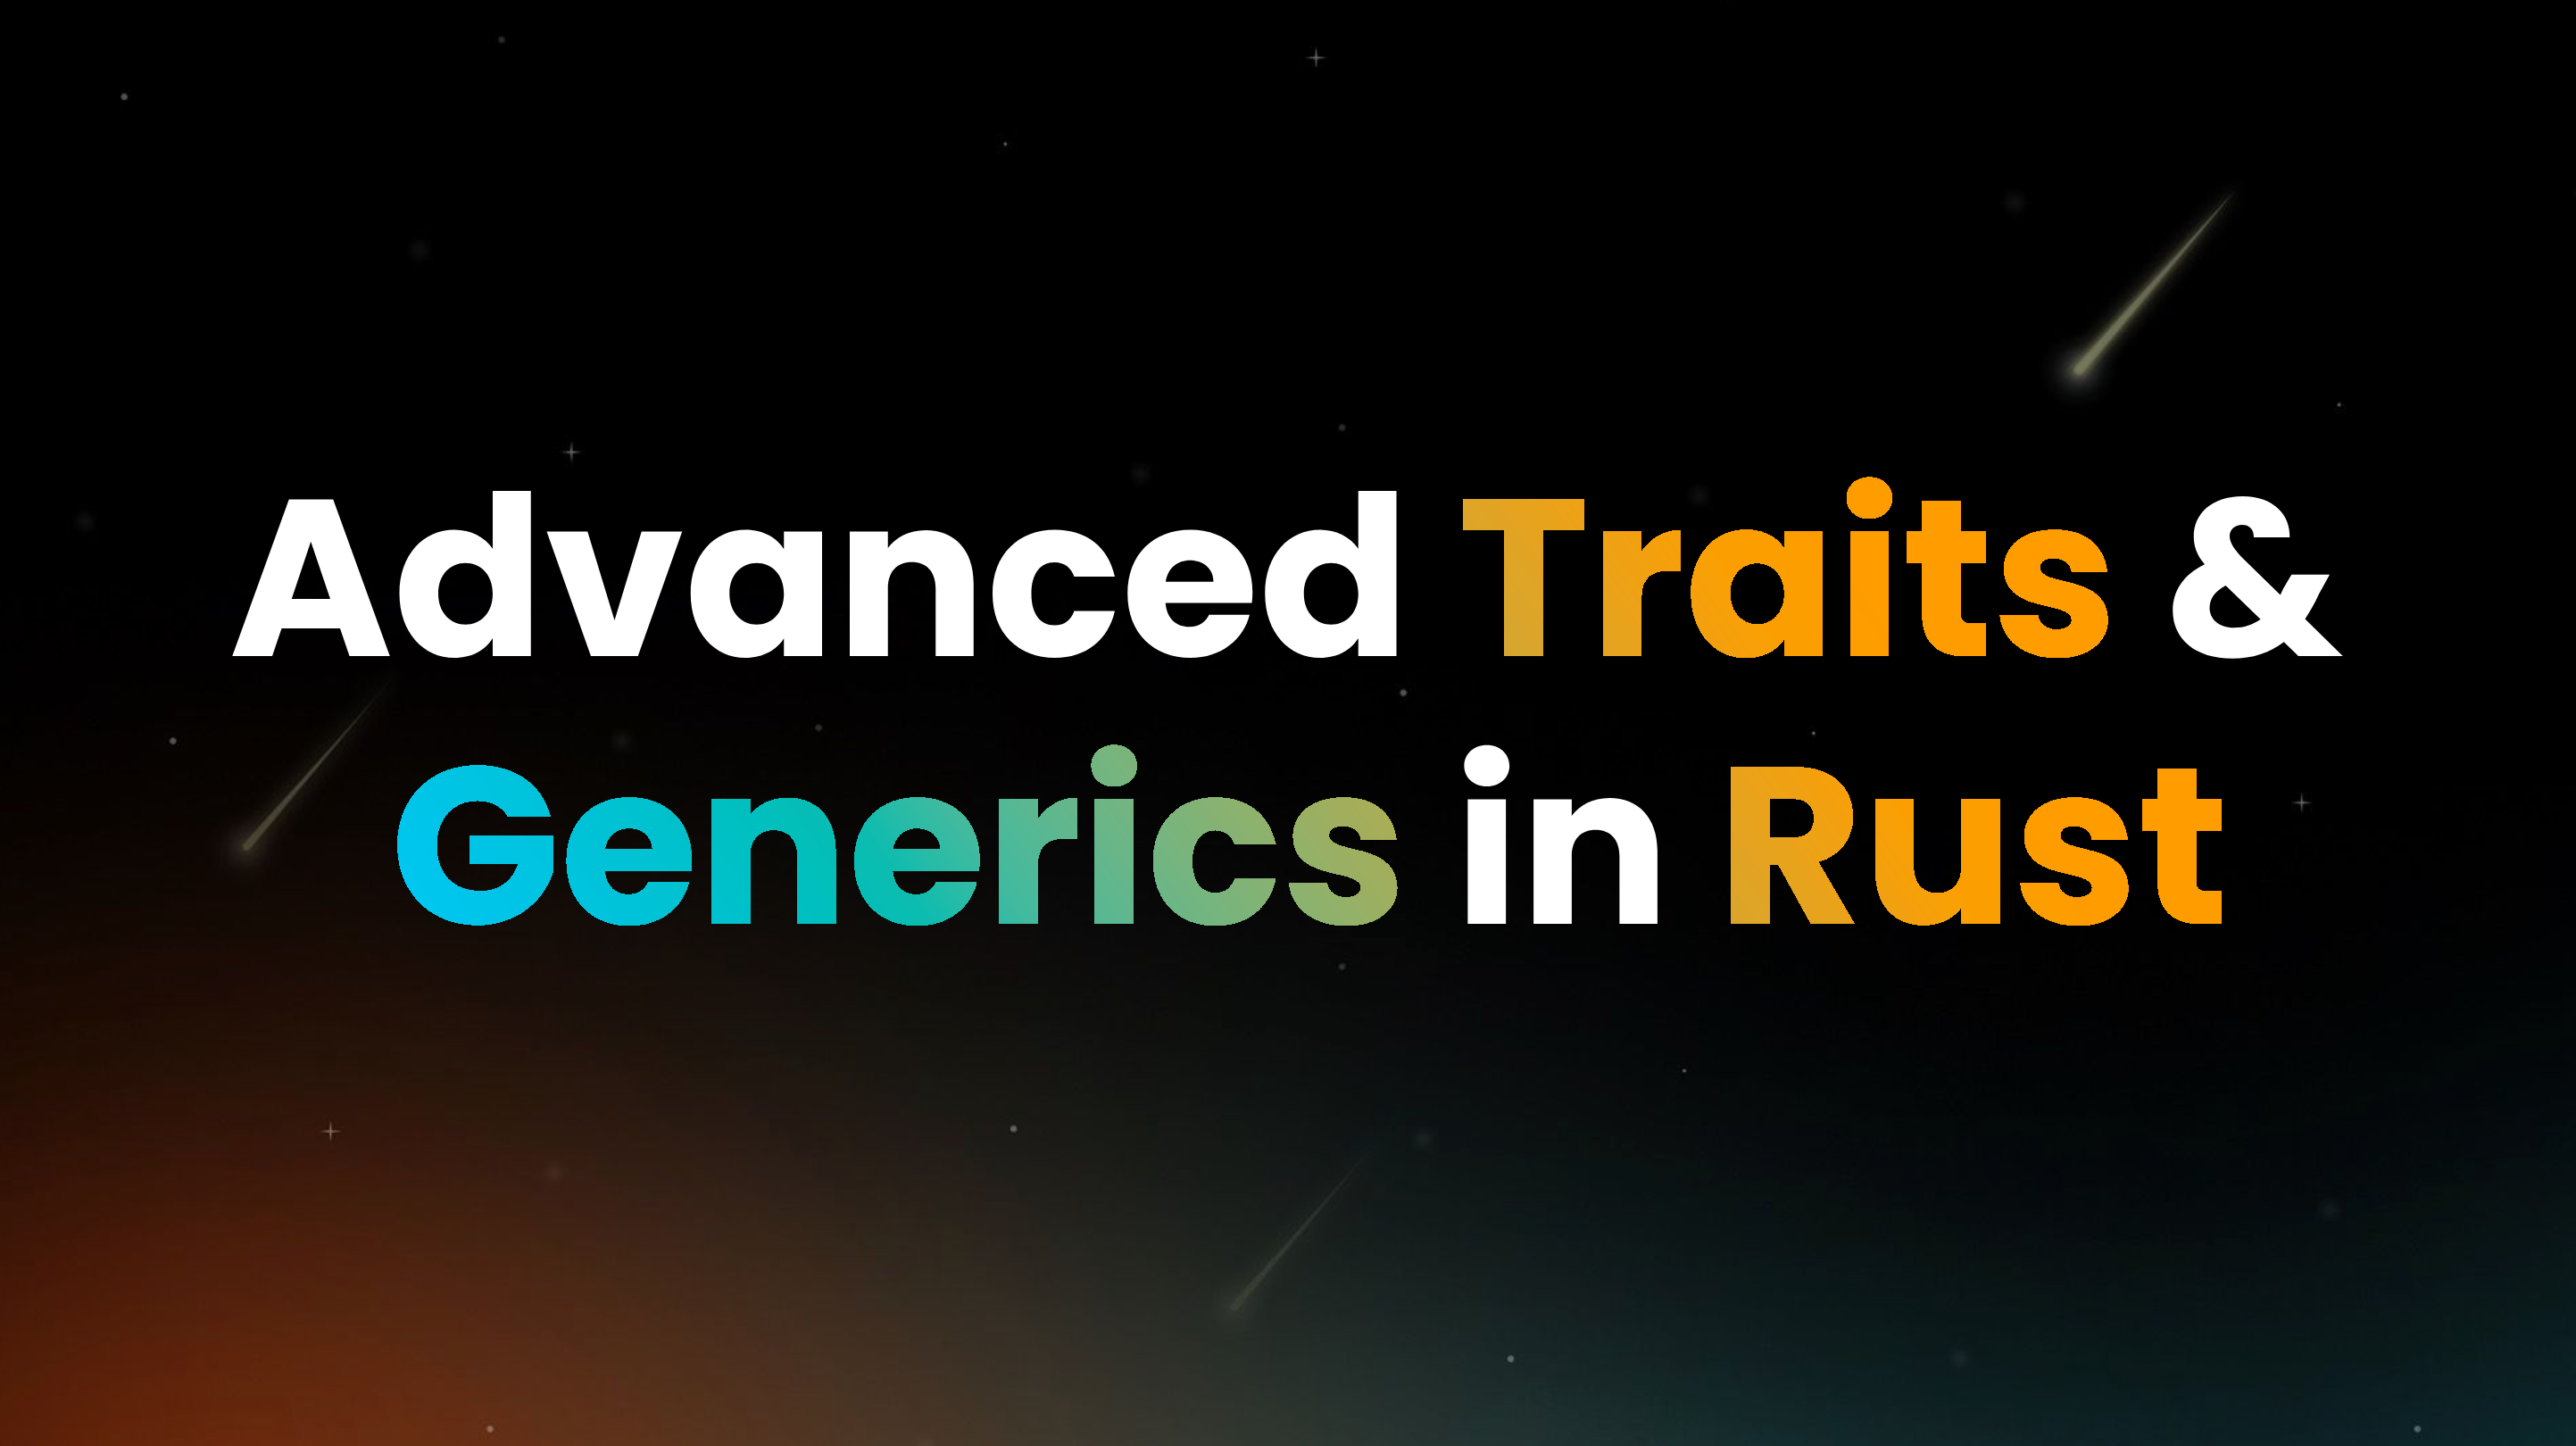 An introduction to advanced Rust traits and generics